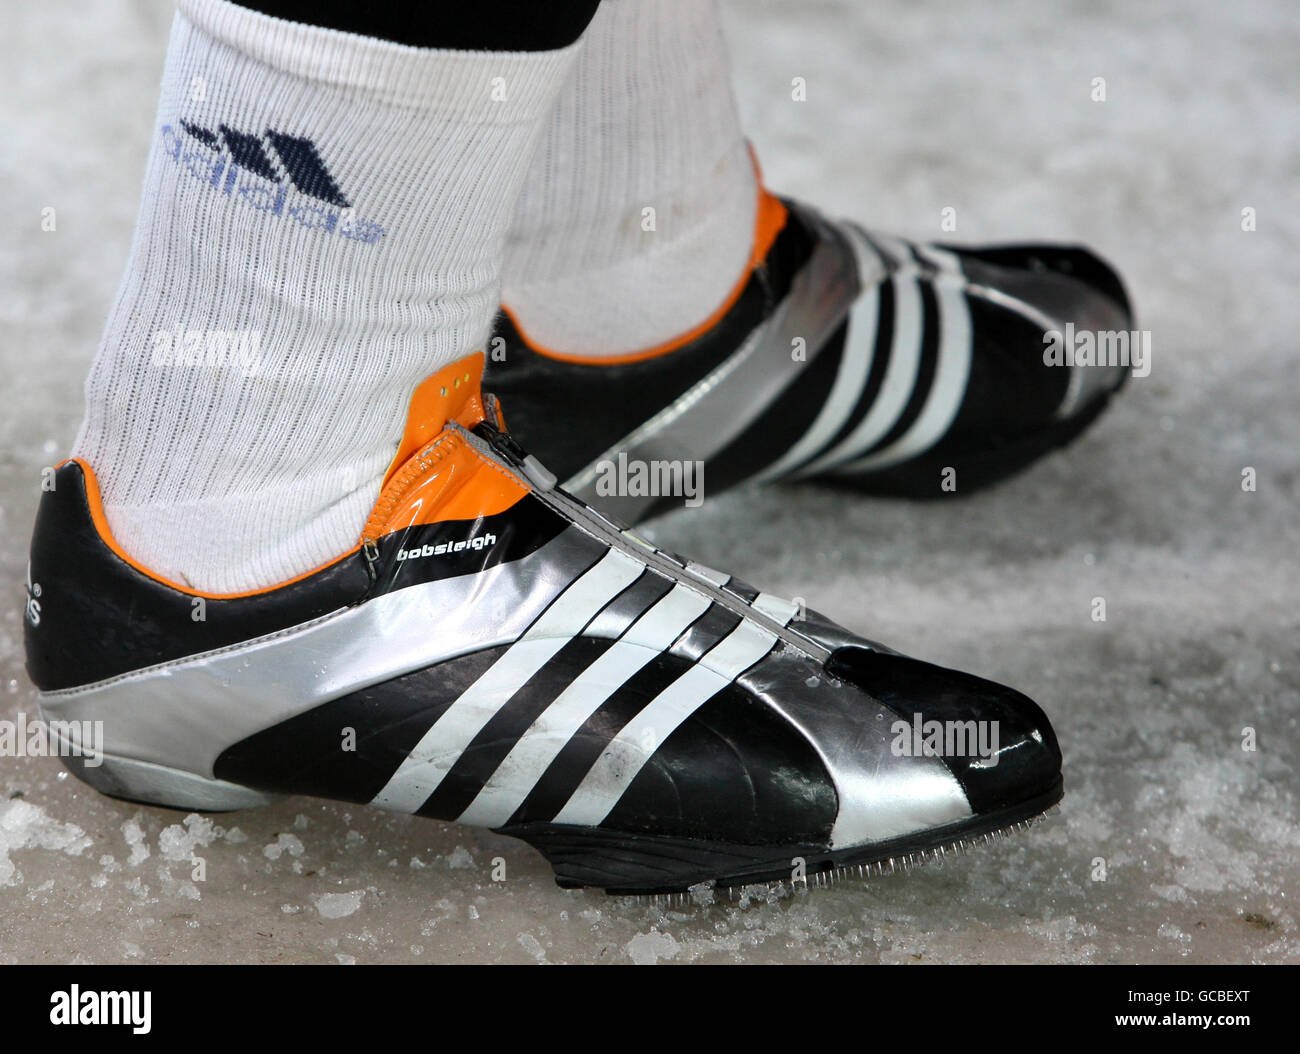 The footwear of a Boblseigher during a training run on the Bobsleigh track  at 2010 Olympic Games at the Whistler Sliding Centre, Whistler, Canada  Stock Photo - Alamy